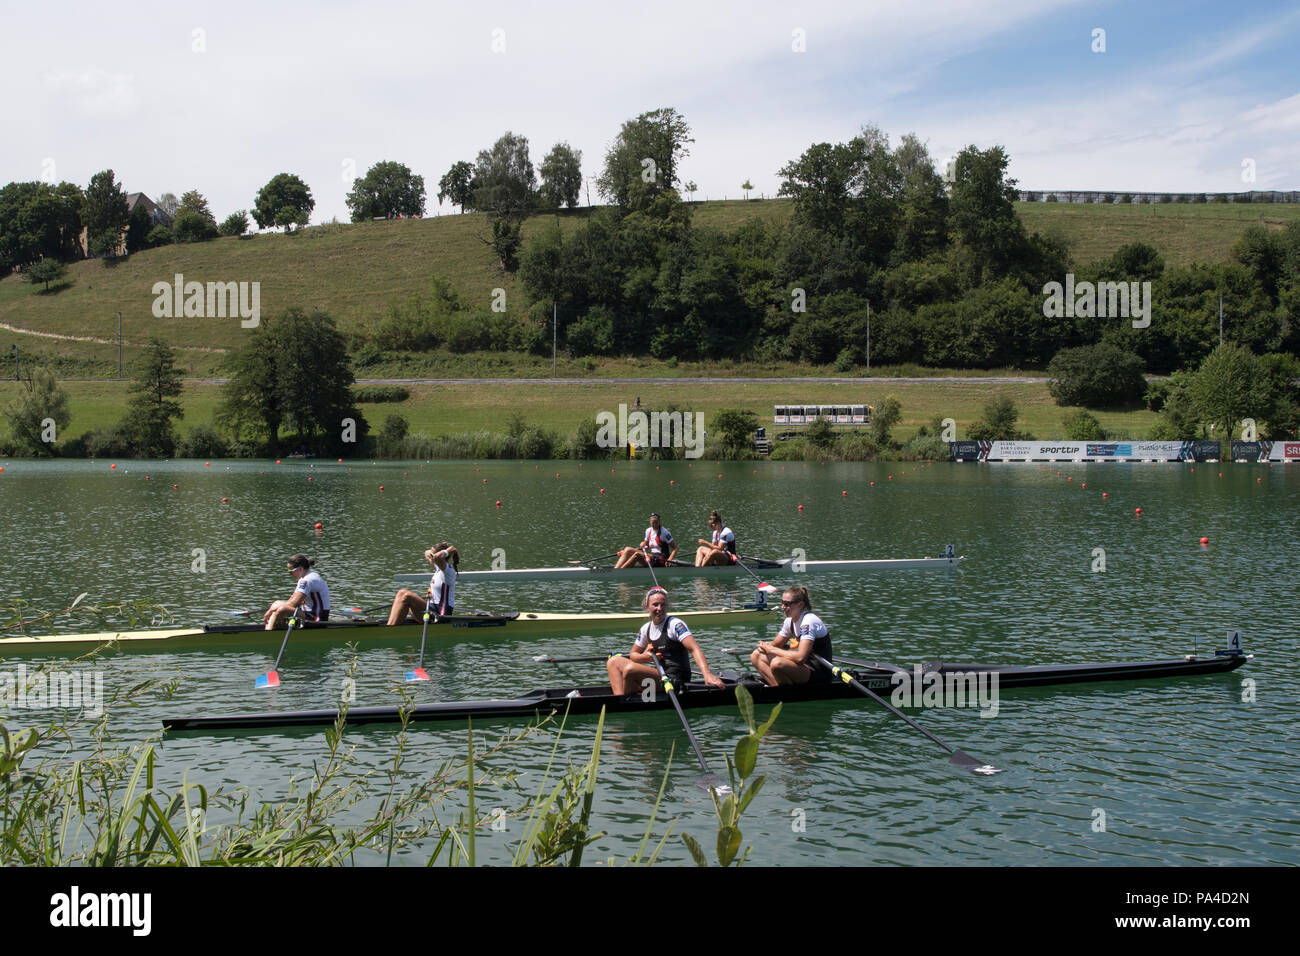 Lucerne, SWITZERLAND, 15th July 2018, left, USA W2X., left, Bronze Medalist, Bow, Meghan O'LEARY Ellen TOMEK, top, Silver Medalist, Canadian's, left, 'Gabrielle SMITH'  and 'Andrea PROSKE', and Bottom NZL W2X Gold Medalist, Brooke DONOGHUE and Olivia LOE, Women's Double Sculls ,FISA World Cup III Lake Rotsee, © Peter SPURRIER, Stock Photo